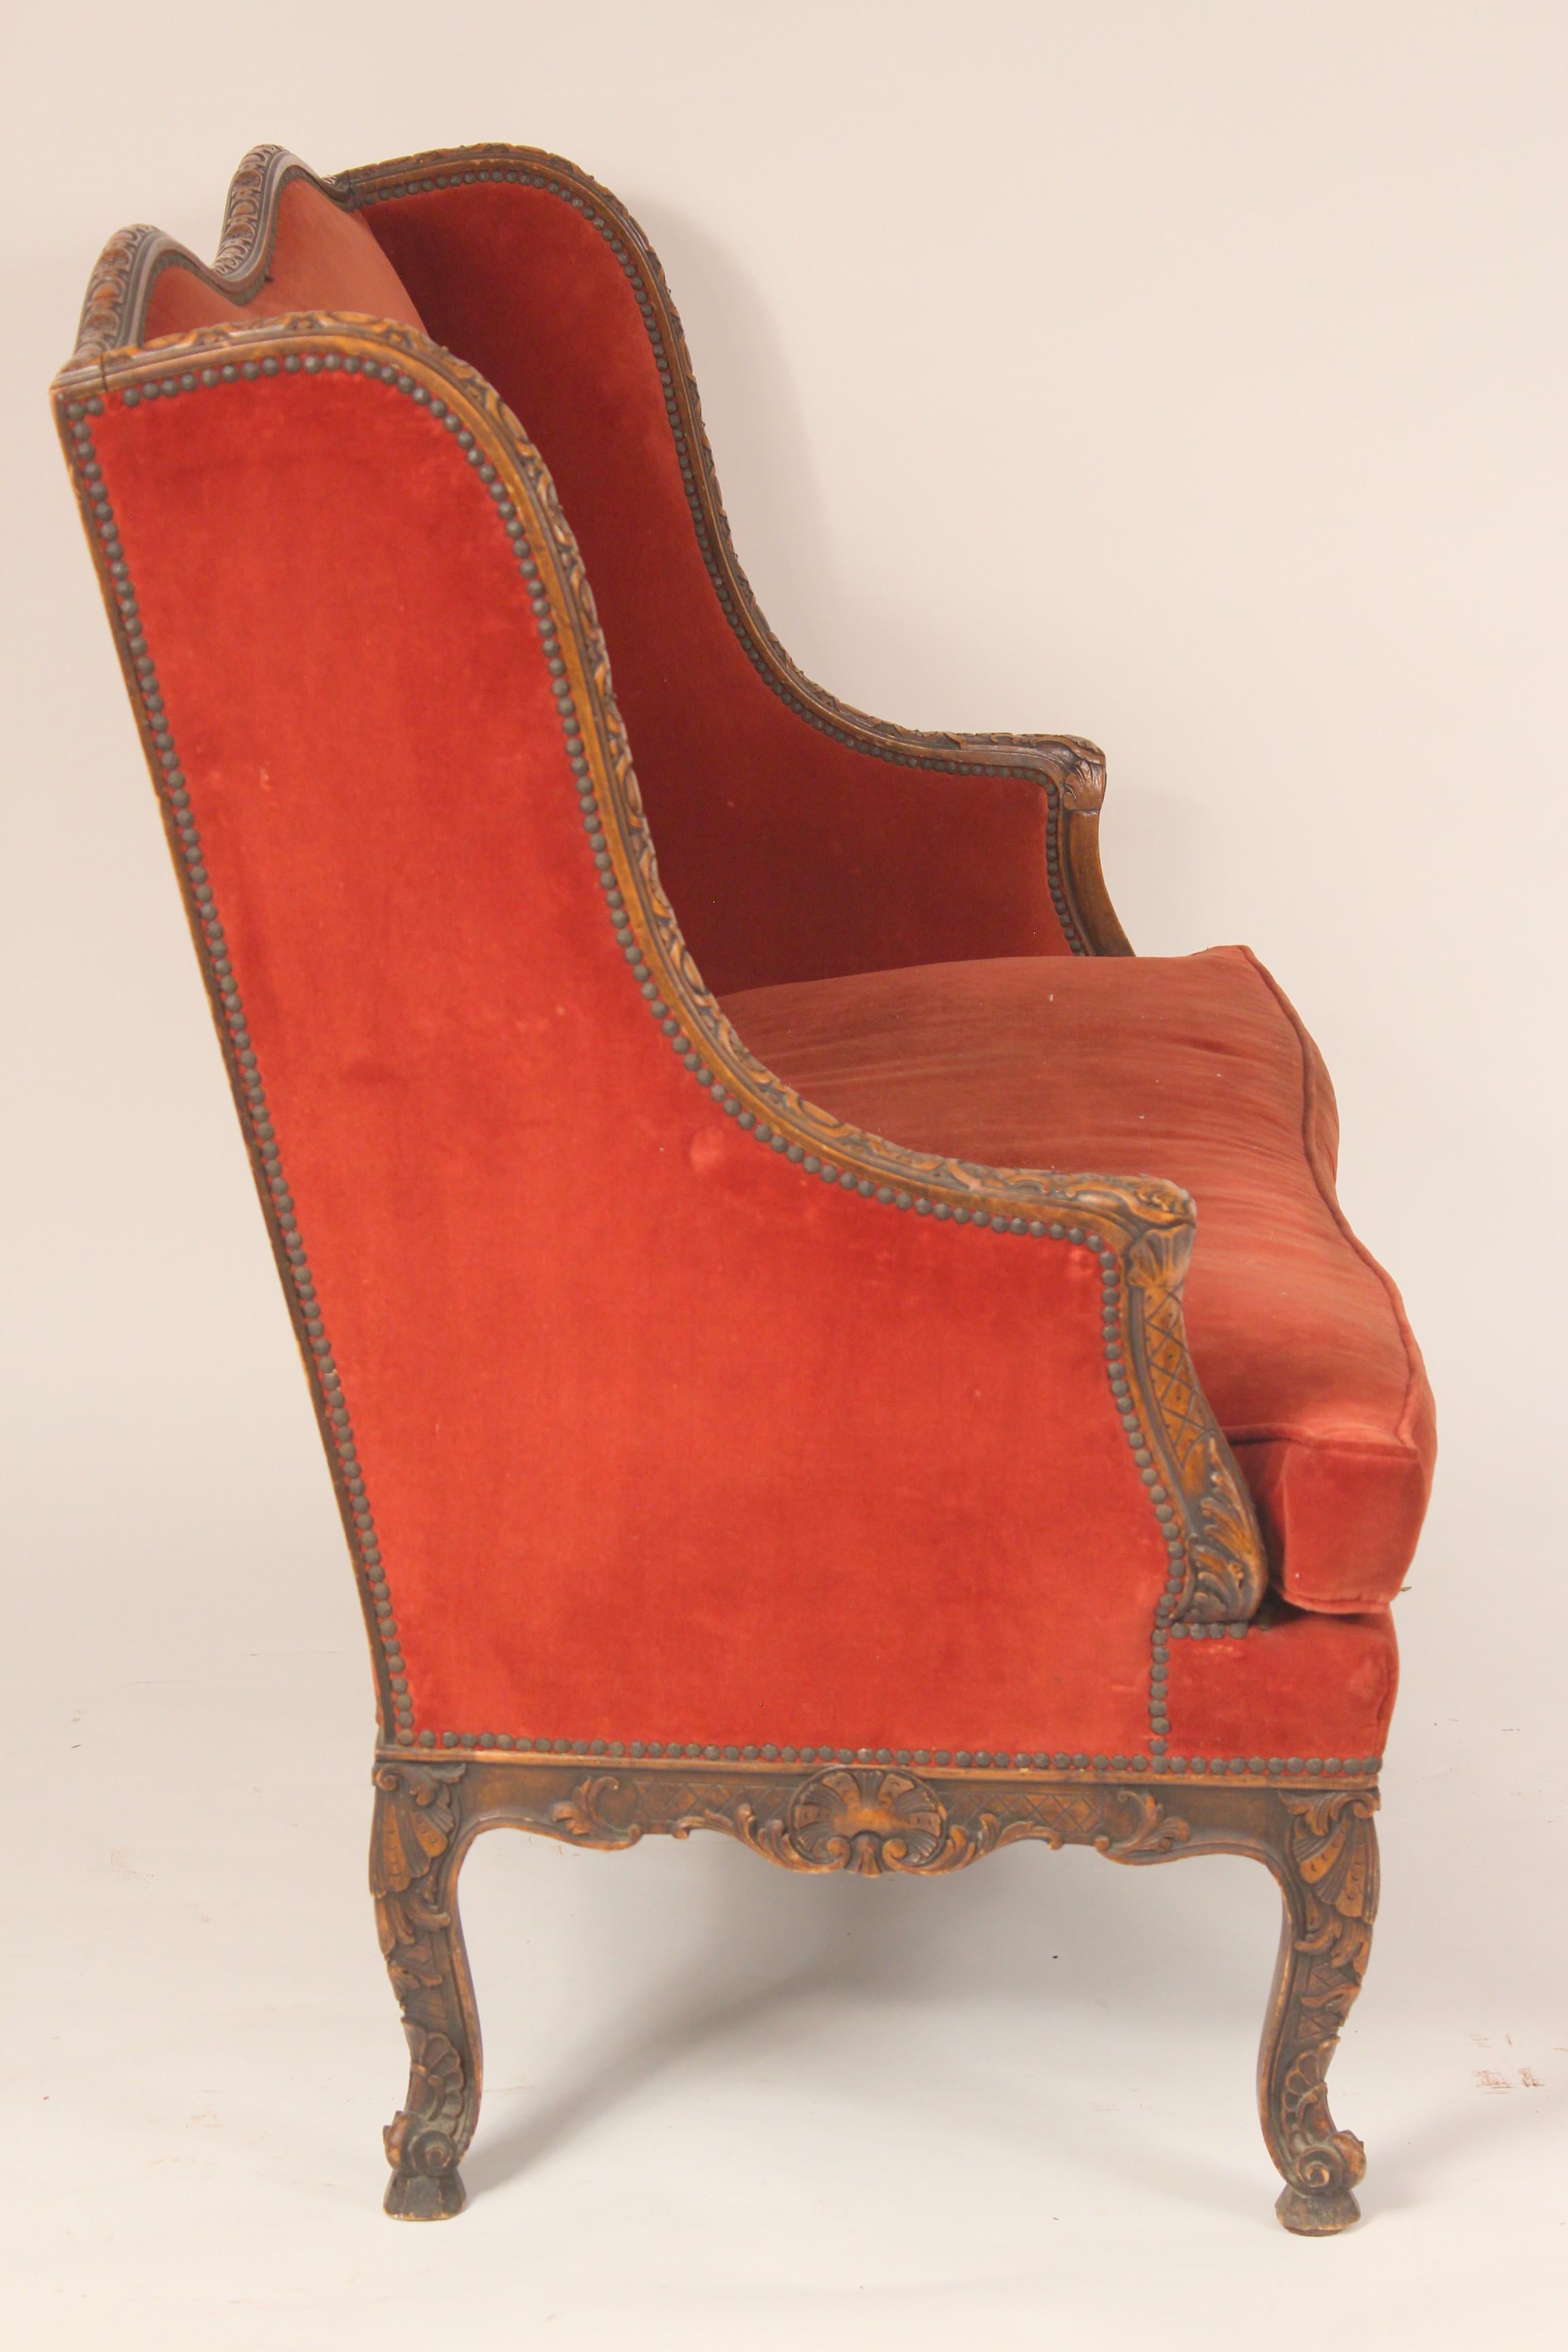 European Antique French Regence Style Settee